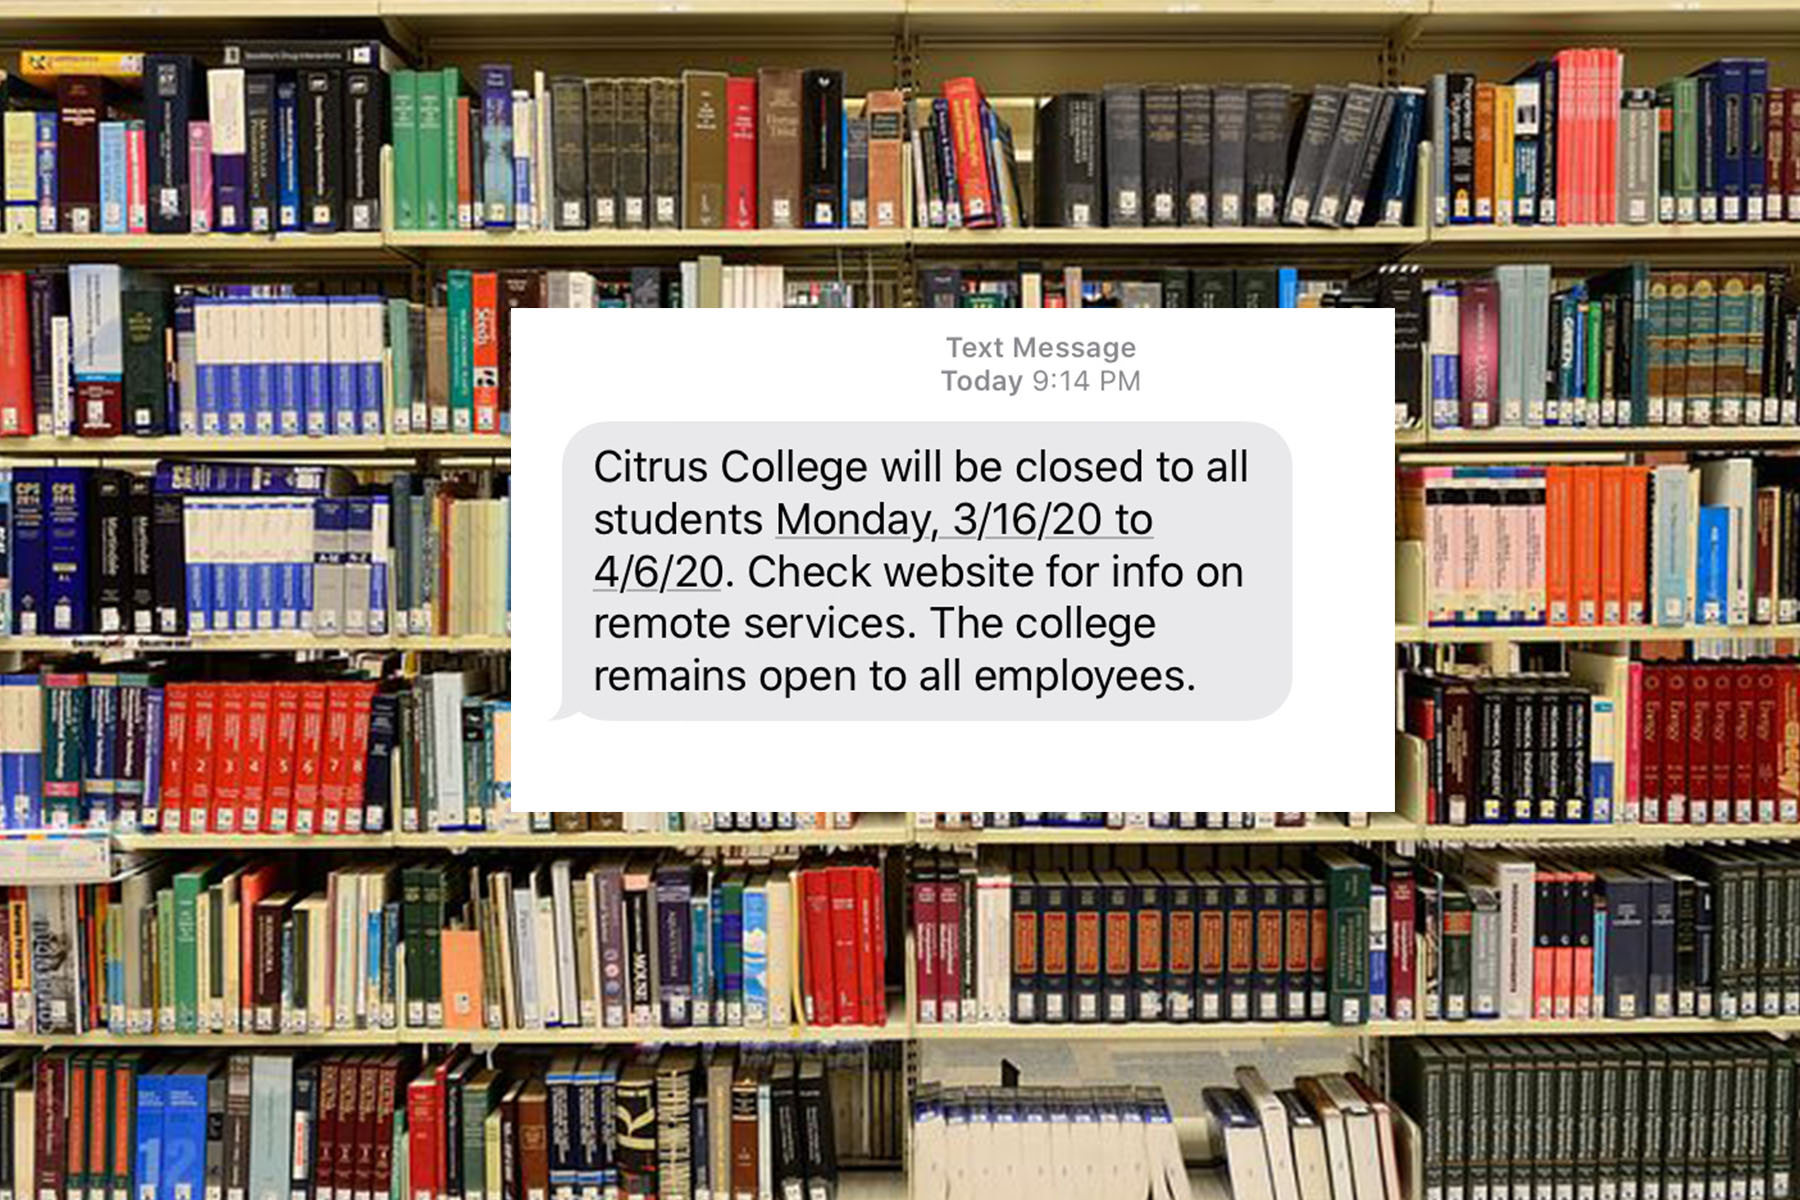 Citrus College closed for all students